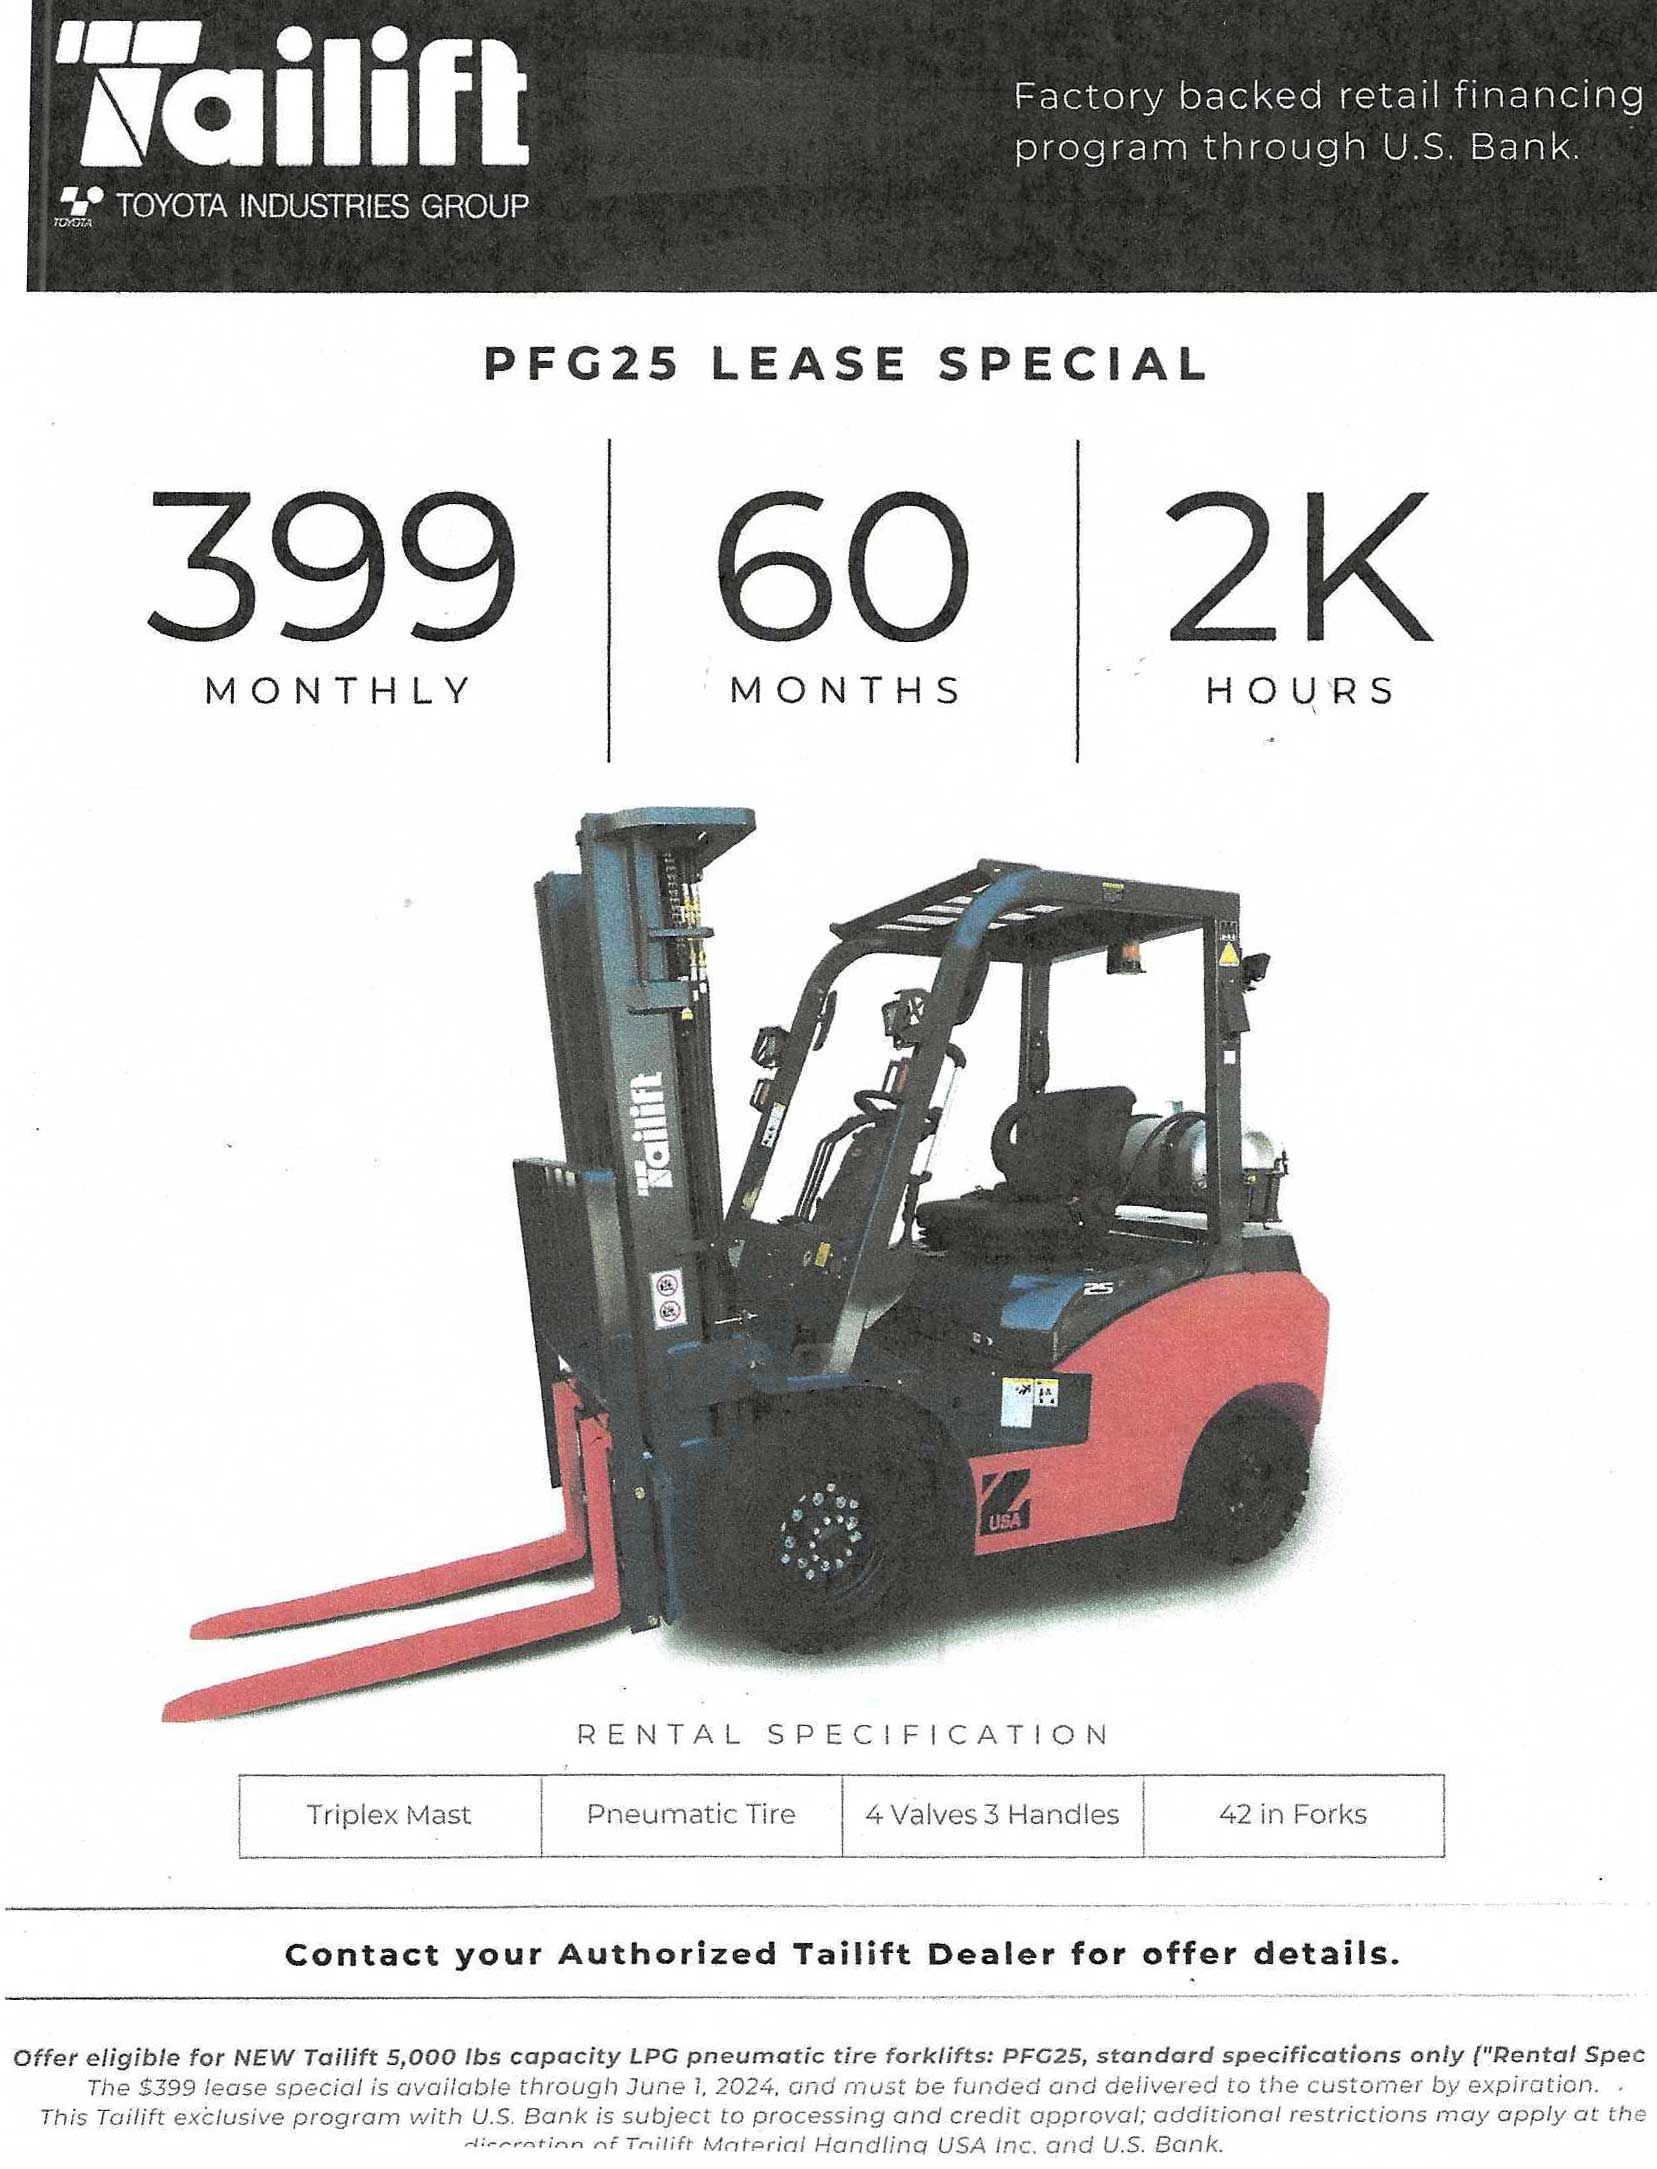 PFG25 Lease Special